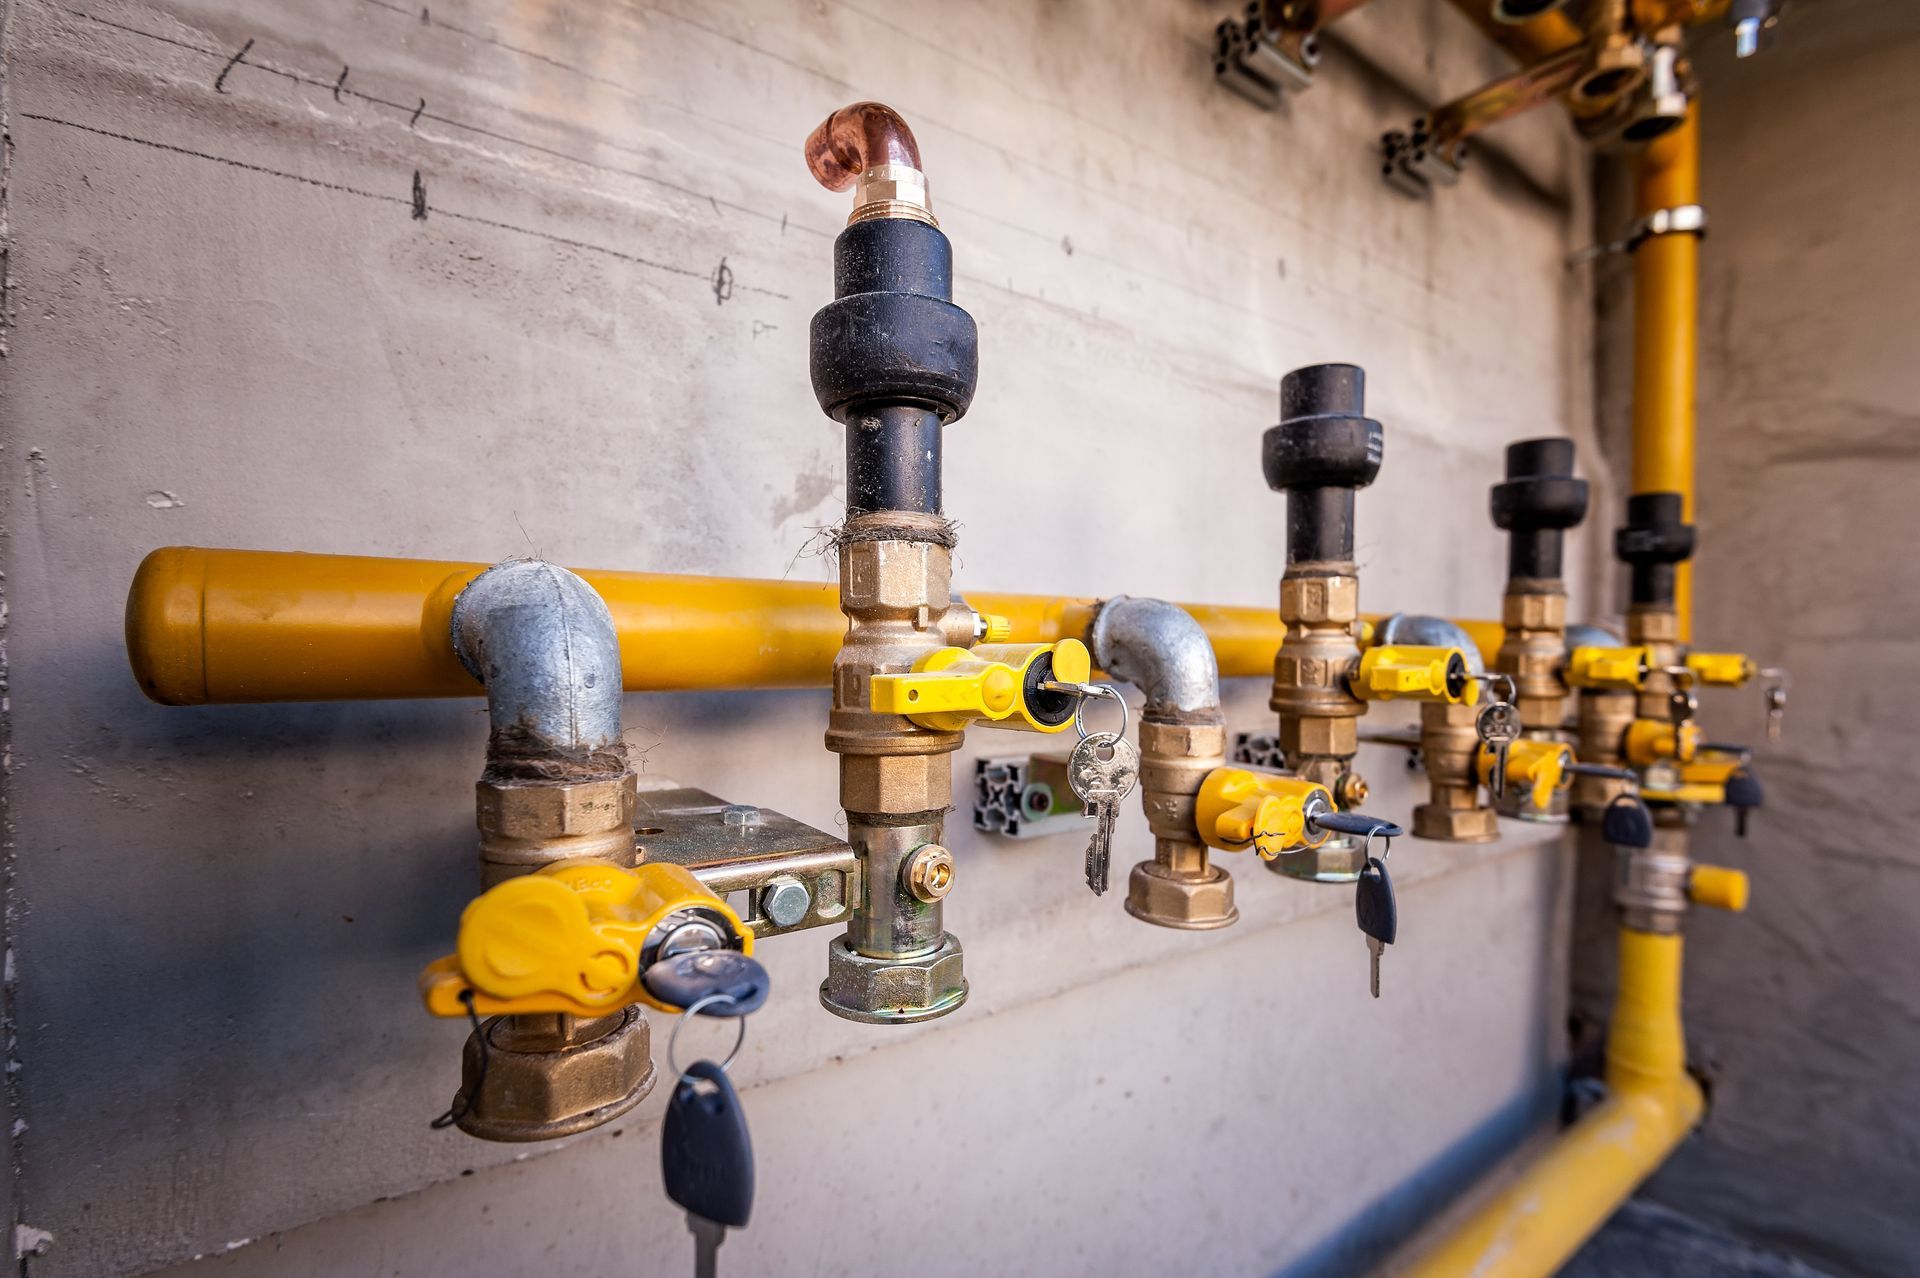 A row of yellow pipes and valves on a wall.